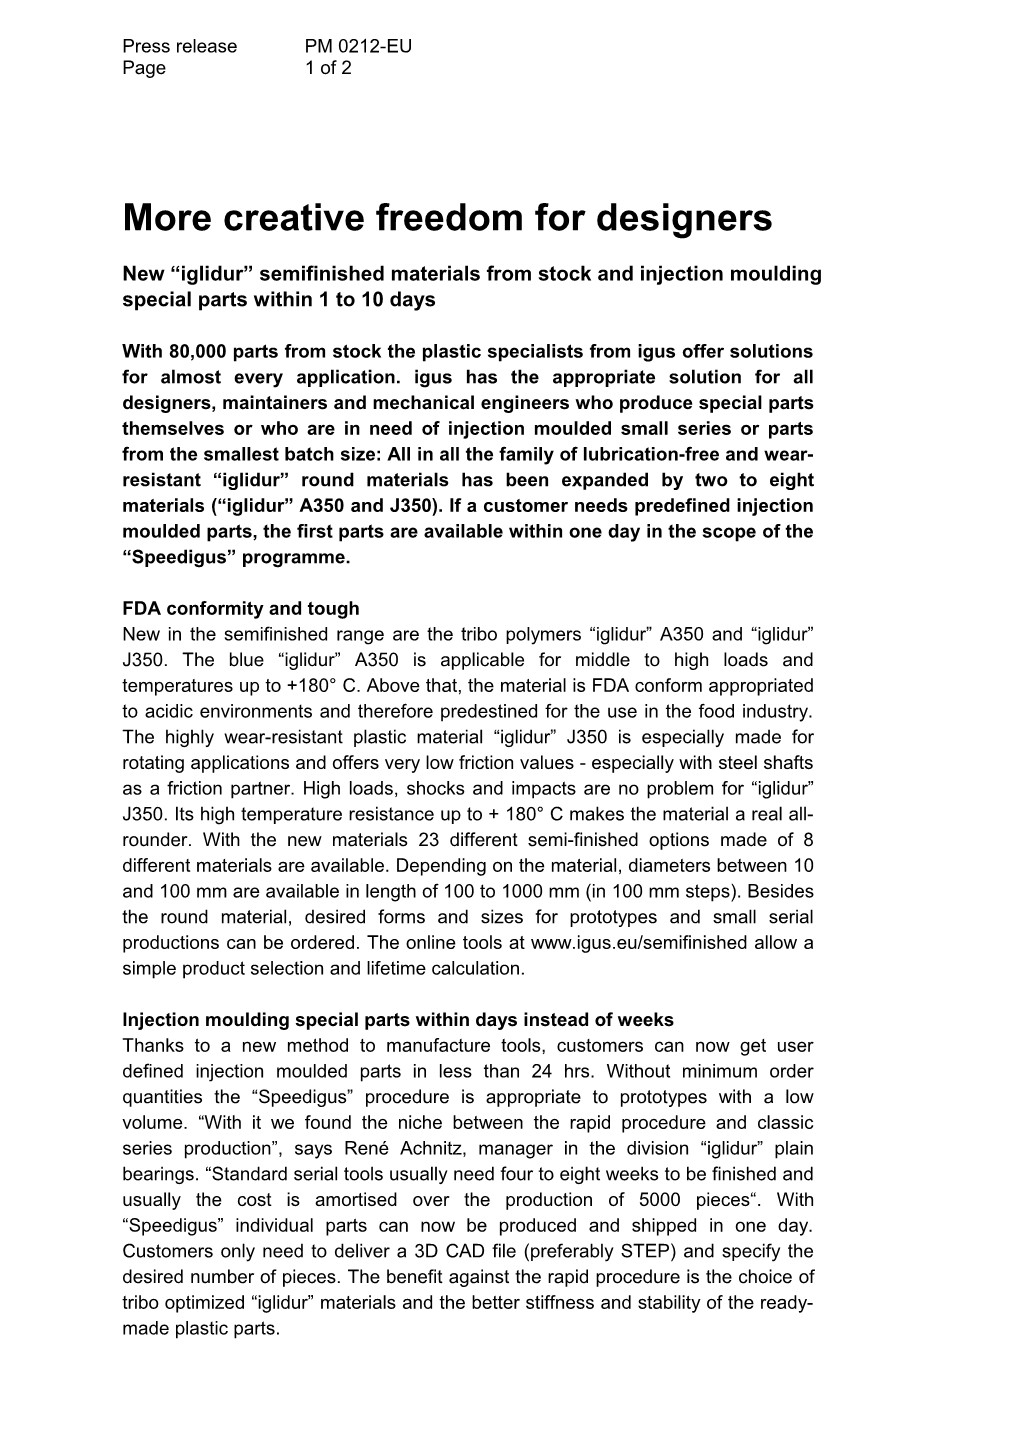 More Creative Freedom for Designers